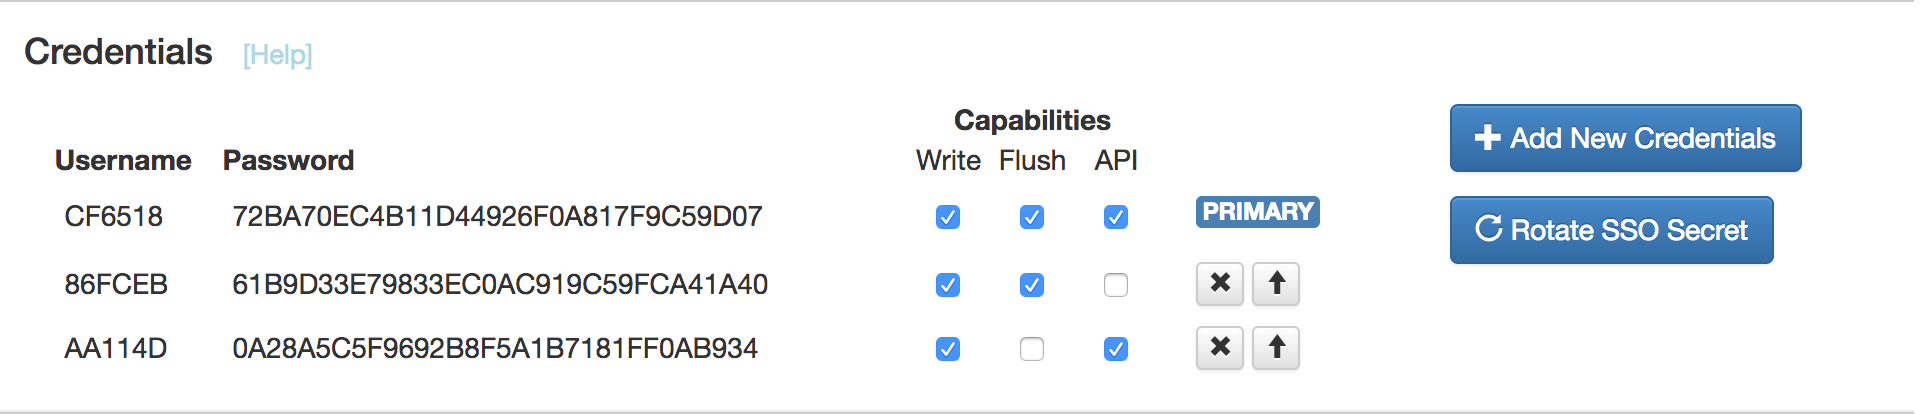 We added an API capability to the already existing credential options.